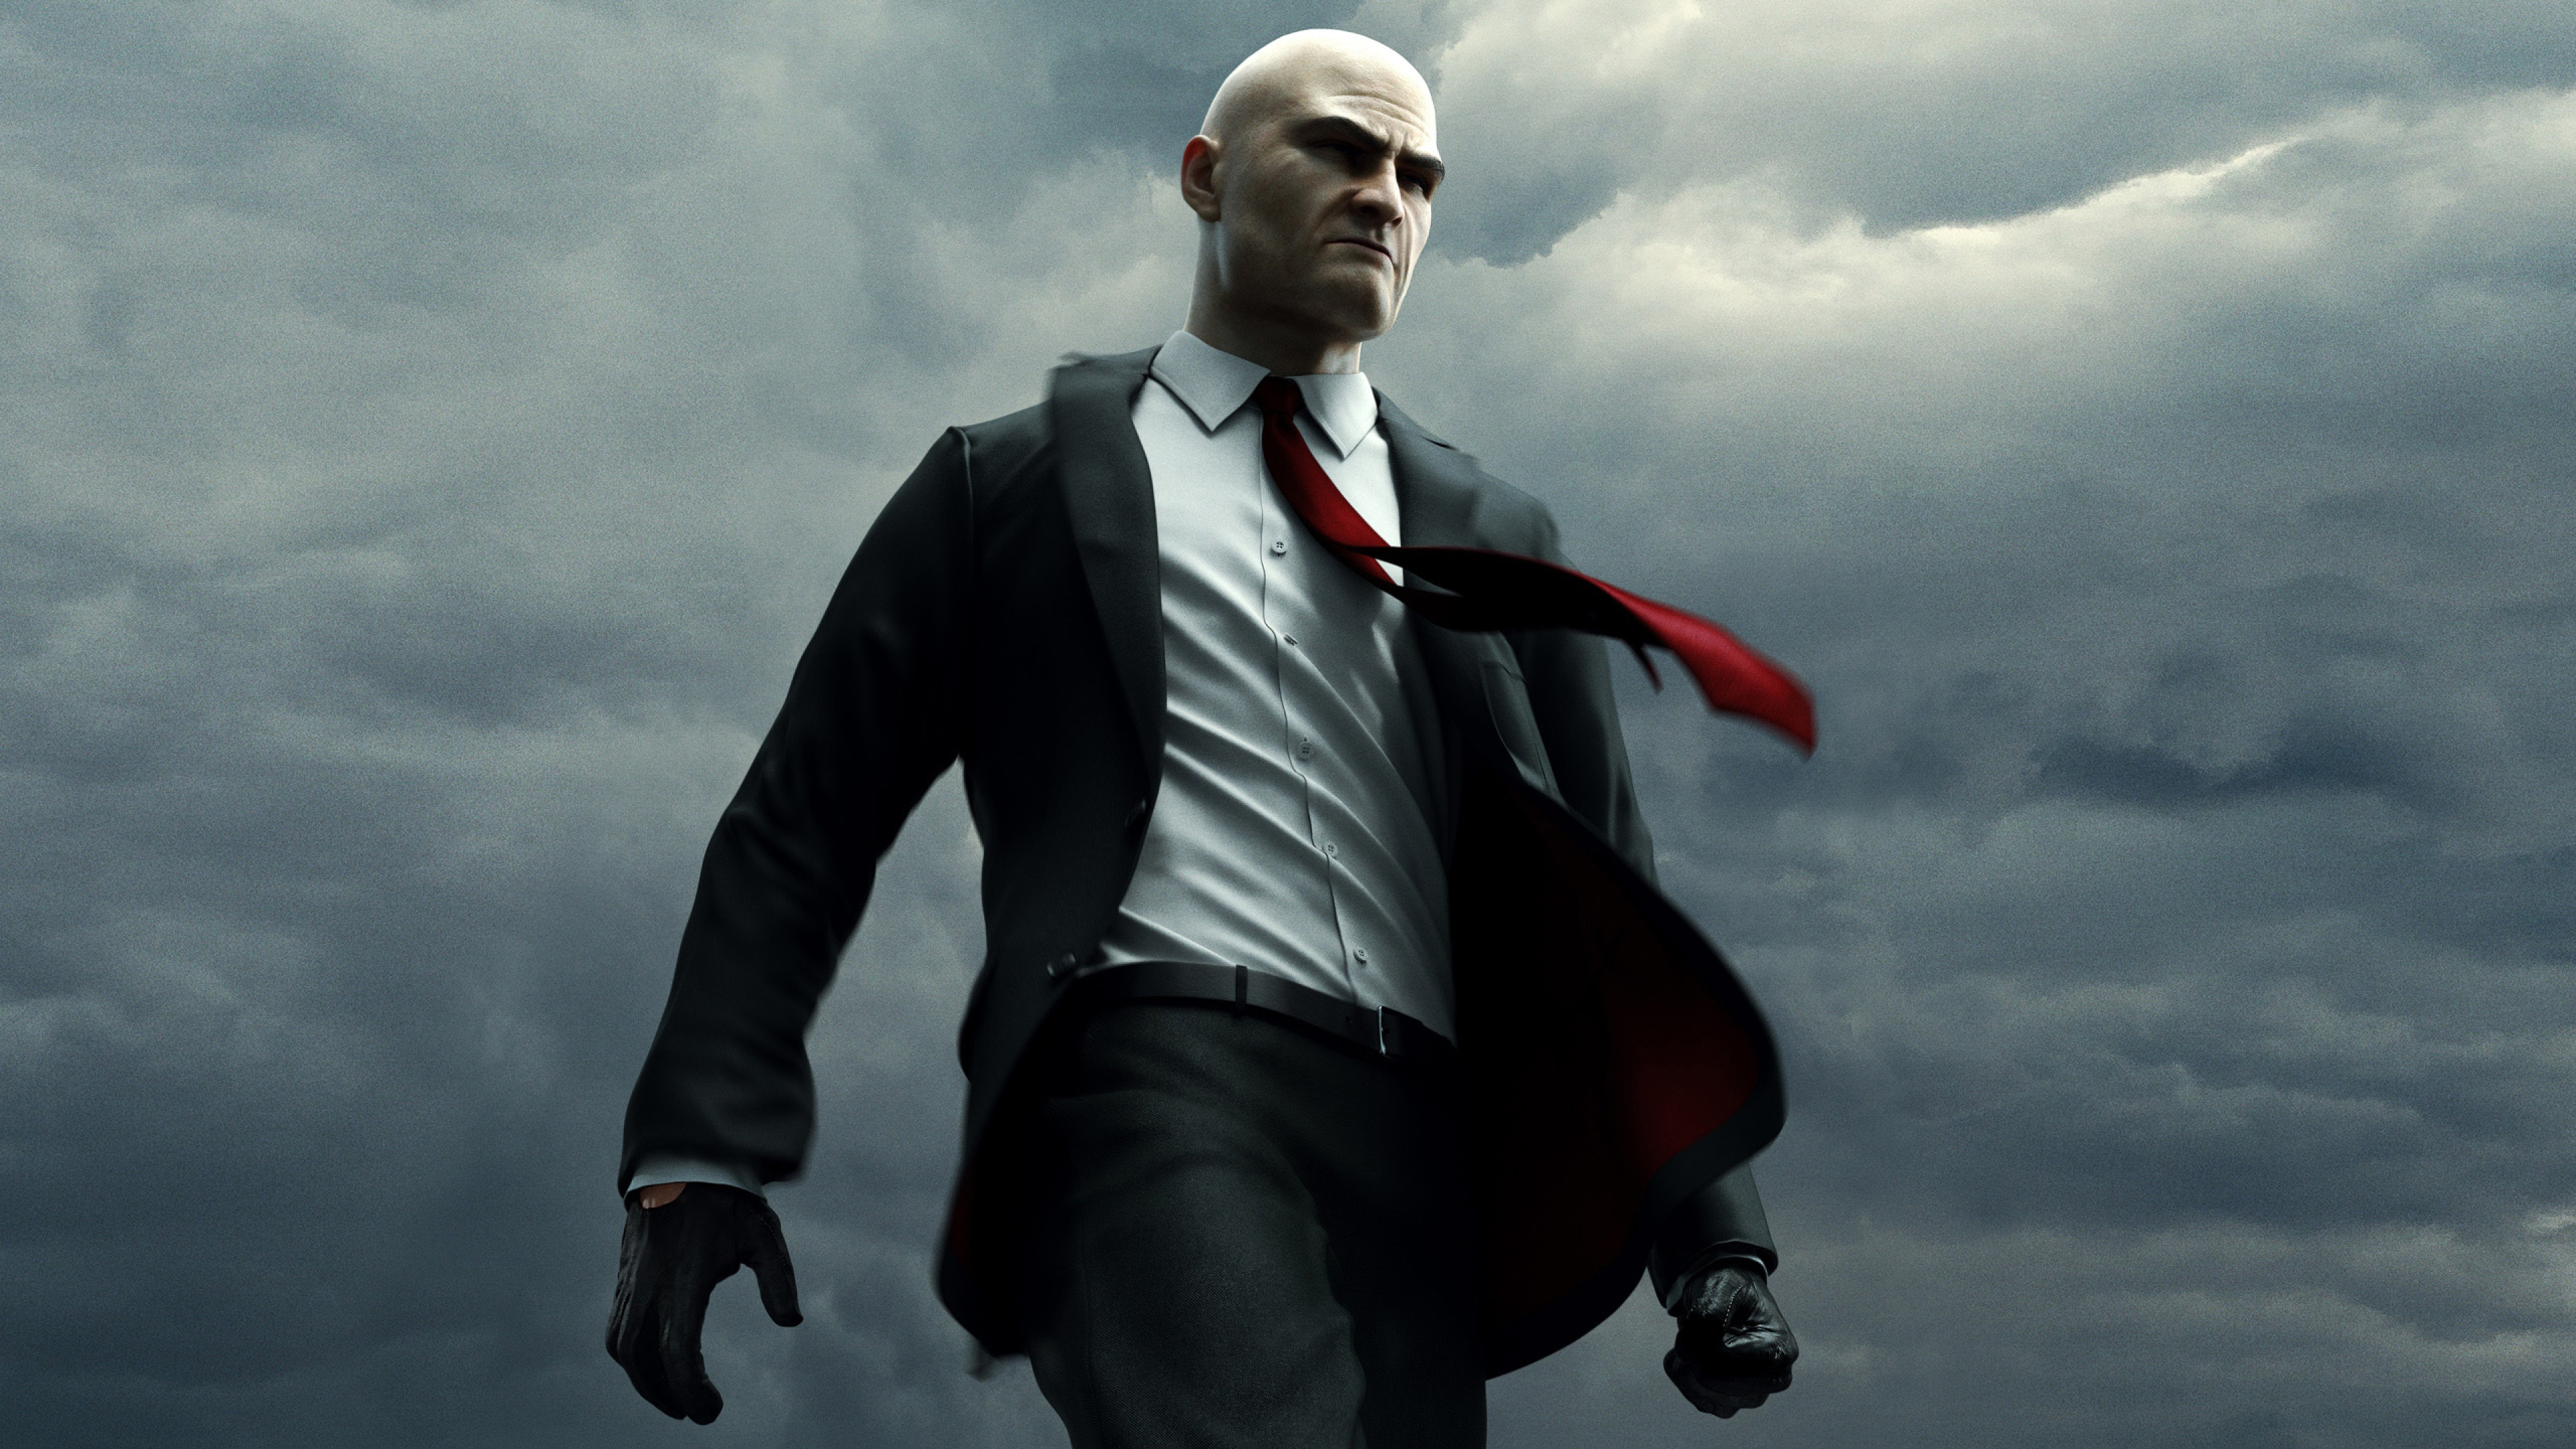 3840x2160 Hitman Absolution Assassin Agent 47 4k Wallpaper Hd Games 4k Wallpapers Images Photos And Background Wallpapers Den